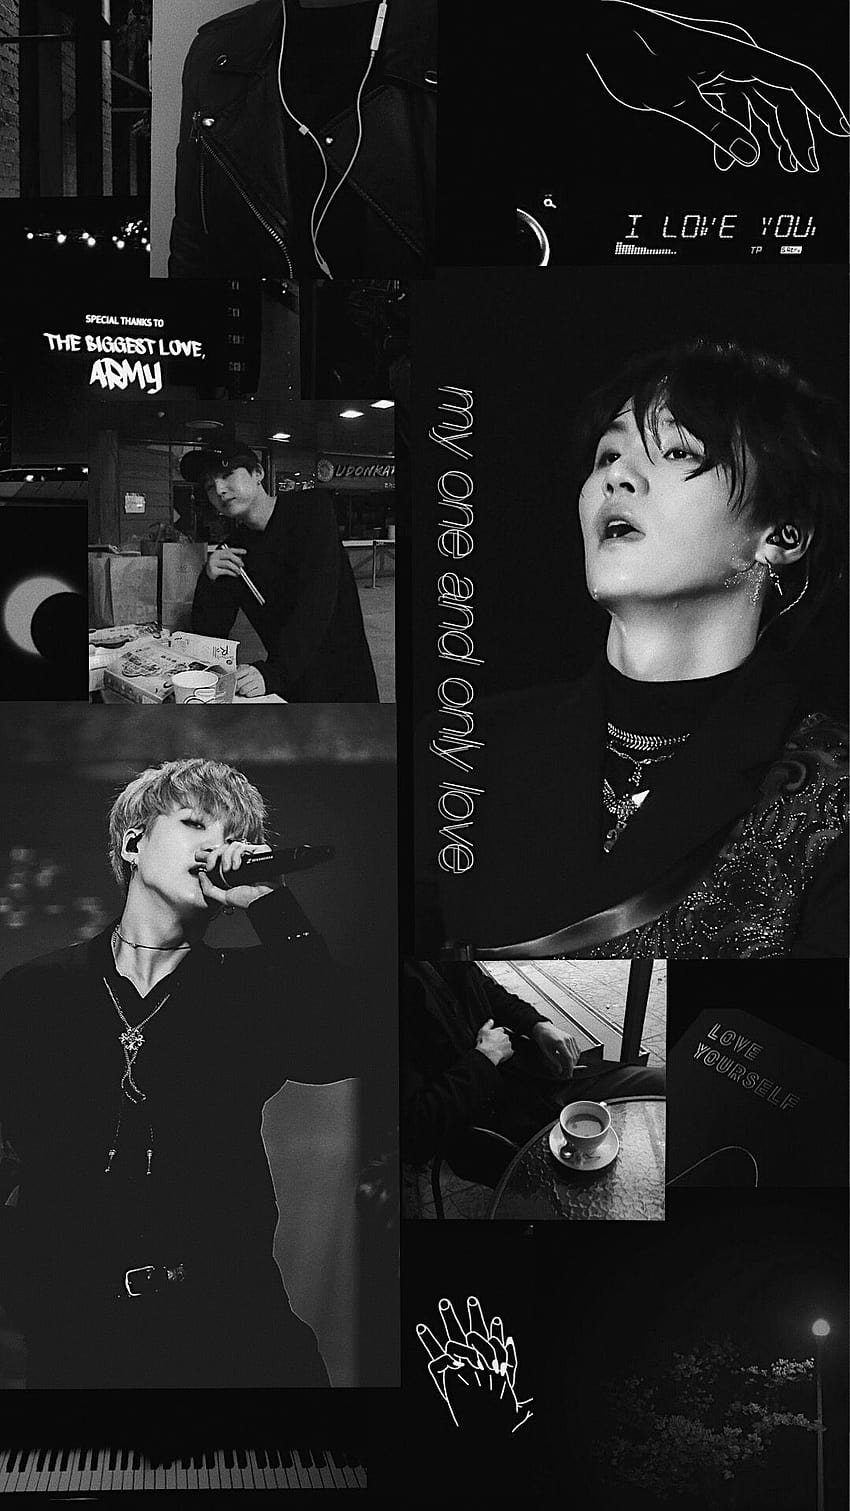 BTS black and white aesthetic wallpaper for phone and desktop. - Suga